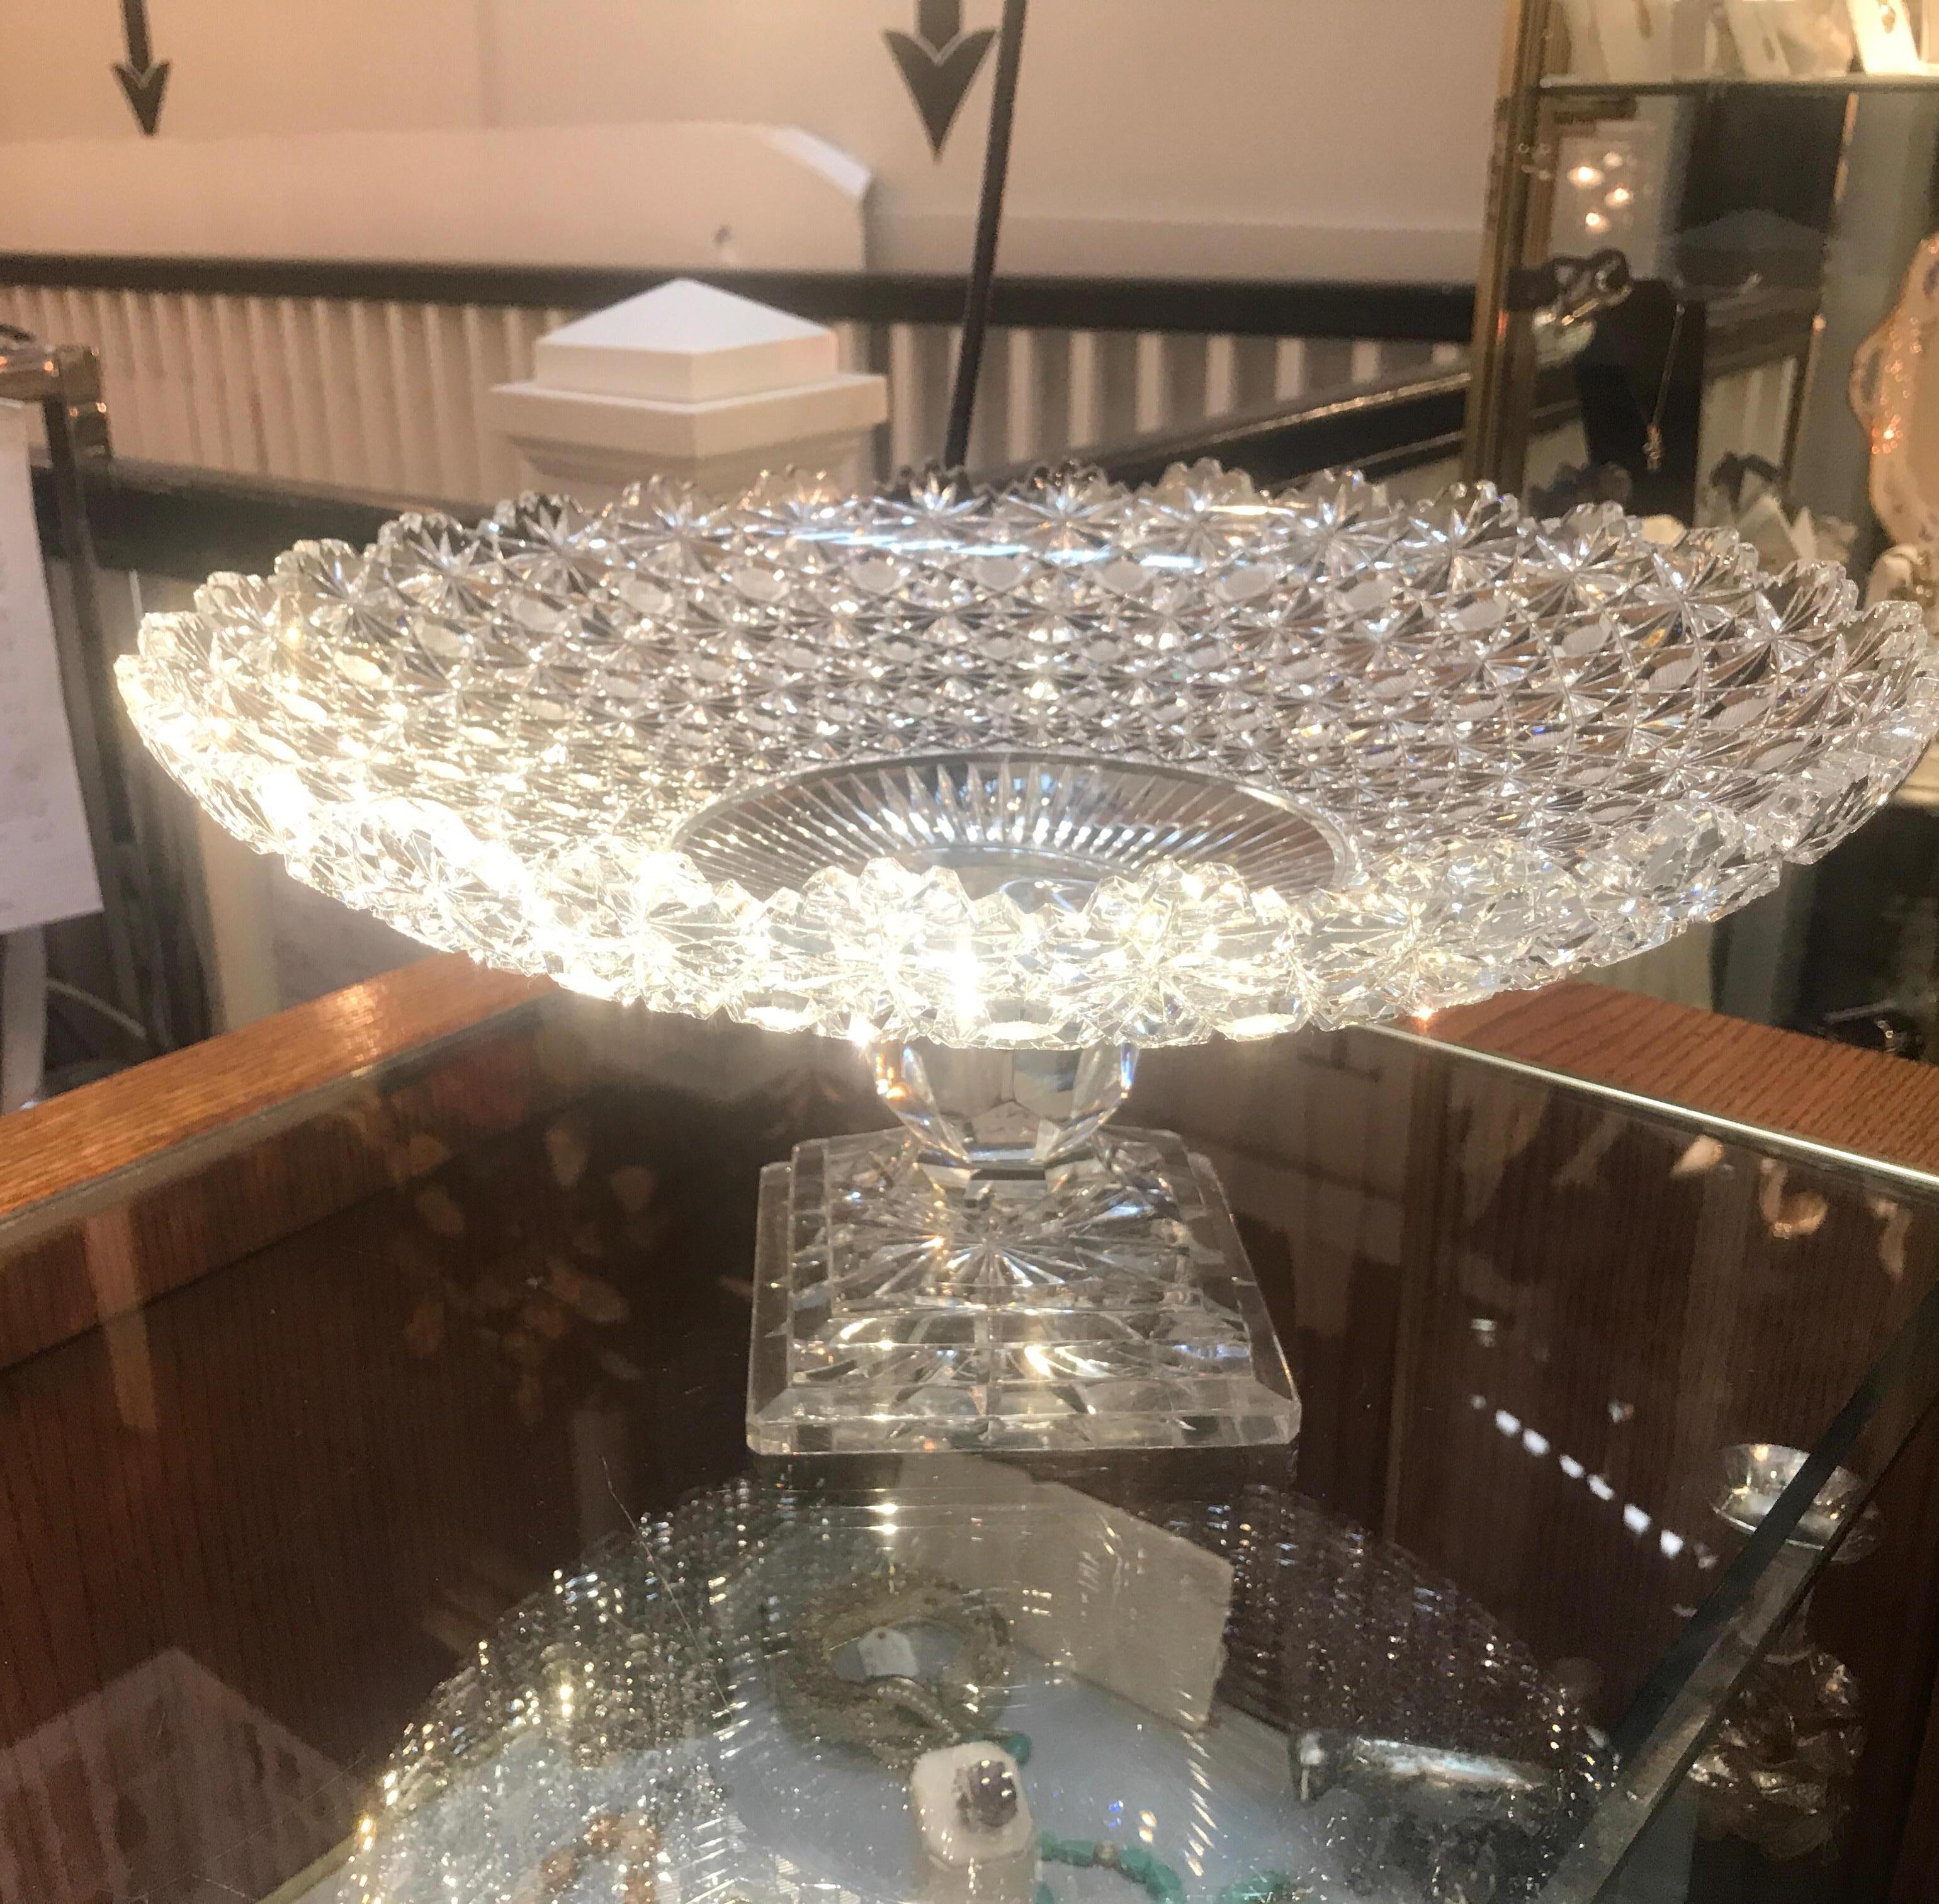 Breathtaking American brilliant cut glass centre bowl compote on pedestal base. Exceptional master cutter piece with thousands of crisp mirror like details all around. The faceted sphere stem resting on a square cut stepped plinth base.